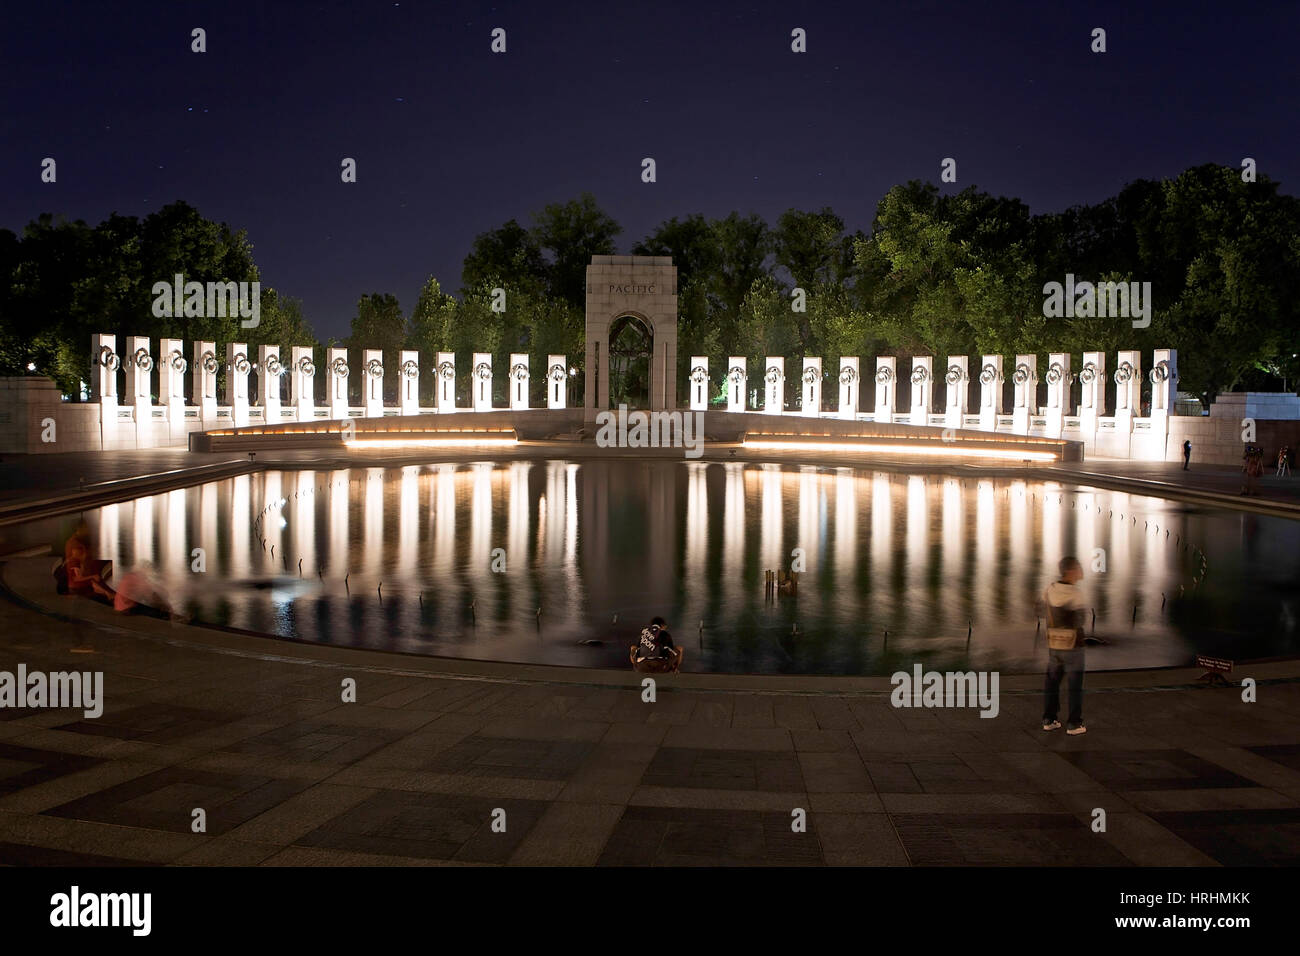 Tourists at the World War Two Memorial on the National Mall in Washington, D.C. on a June night in 2014. Stock Photo